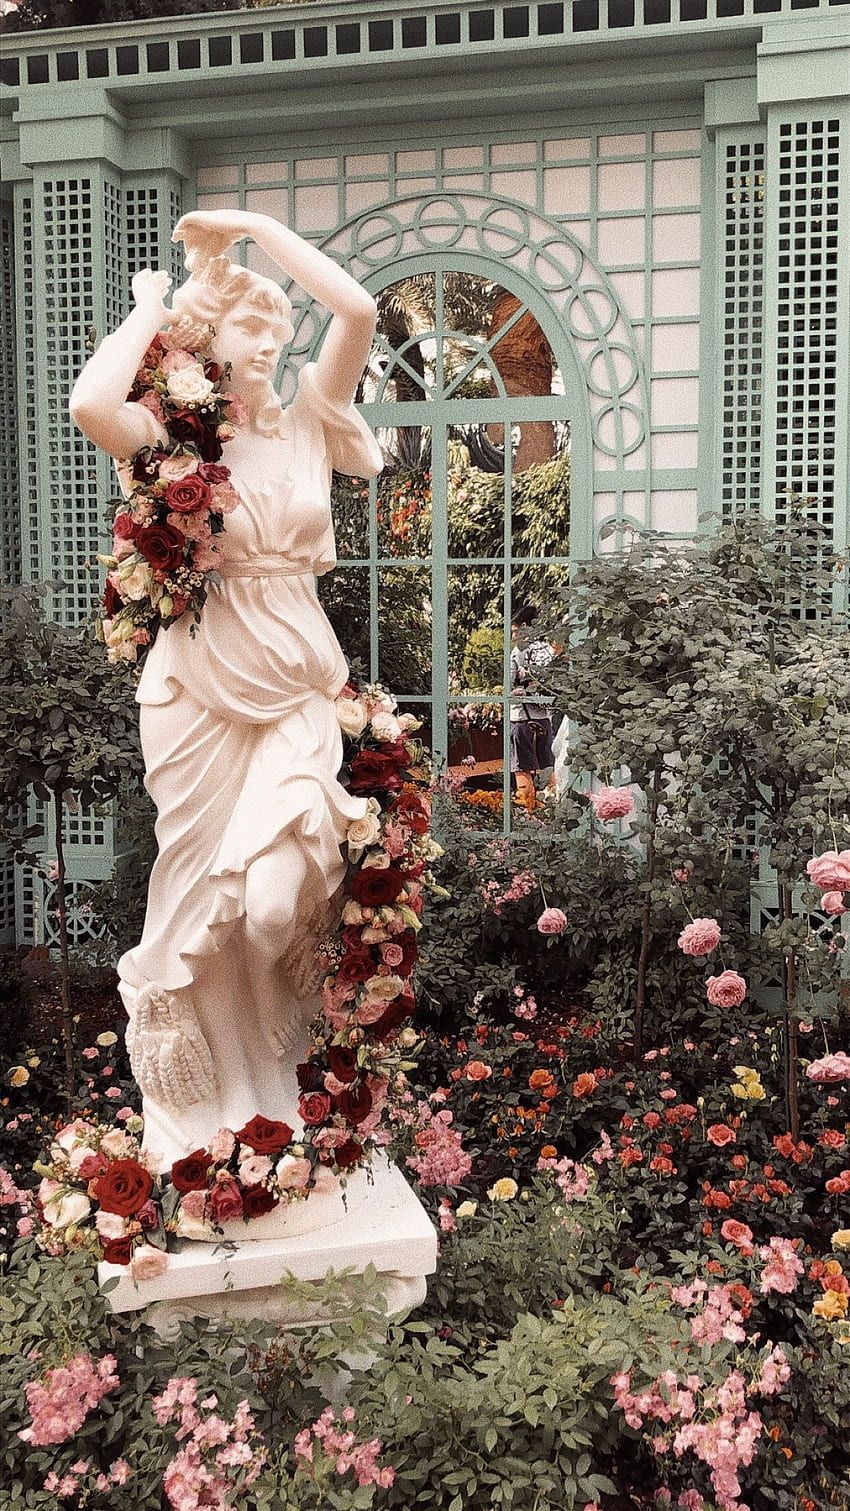 A statue of a woman with flowers in her hair - Garden